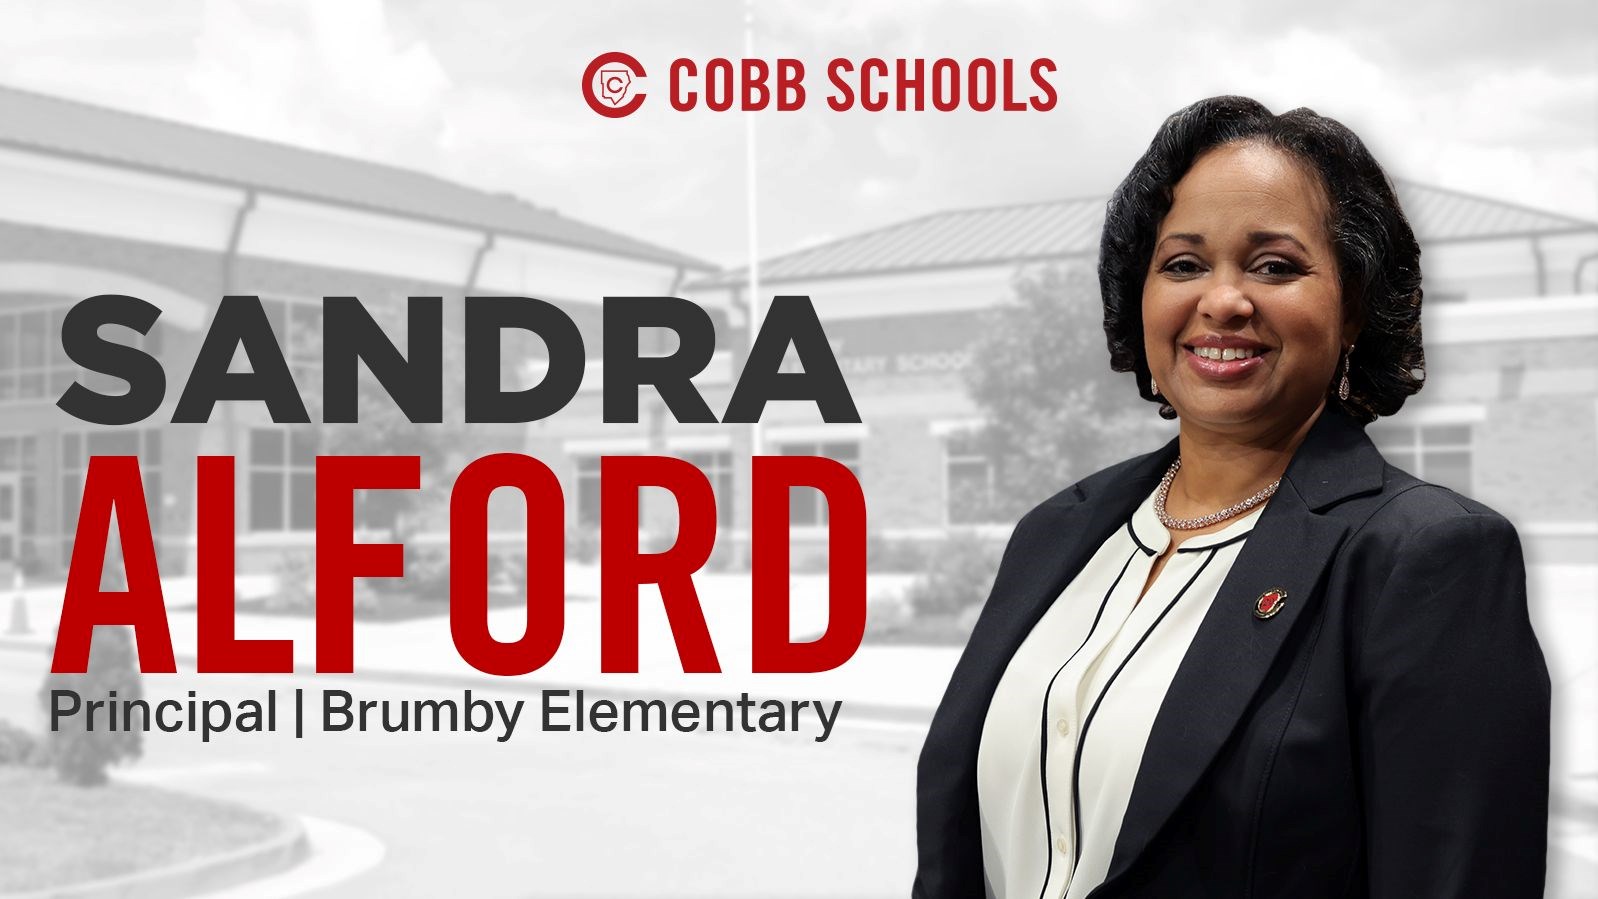 Sandra Alford to serve as principal at Brumby Elementary School